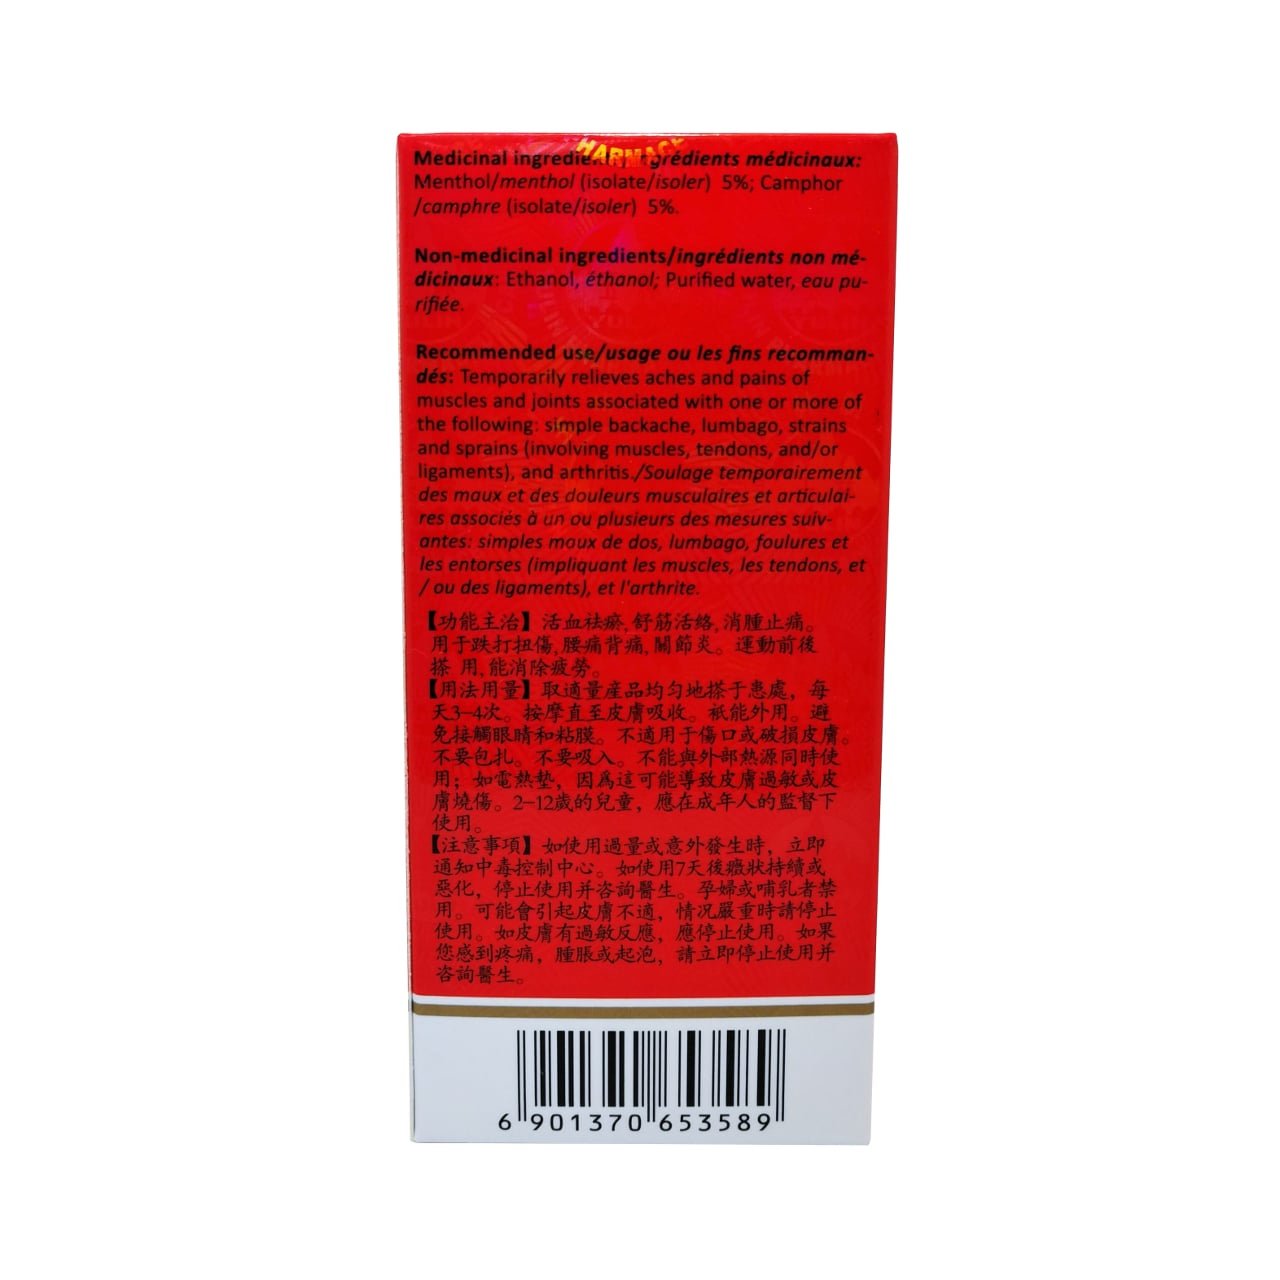 Product ingredients and use for Yulin Zheng Gu Shui Pain Relief Liniment in English, French, and Chinese